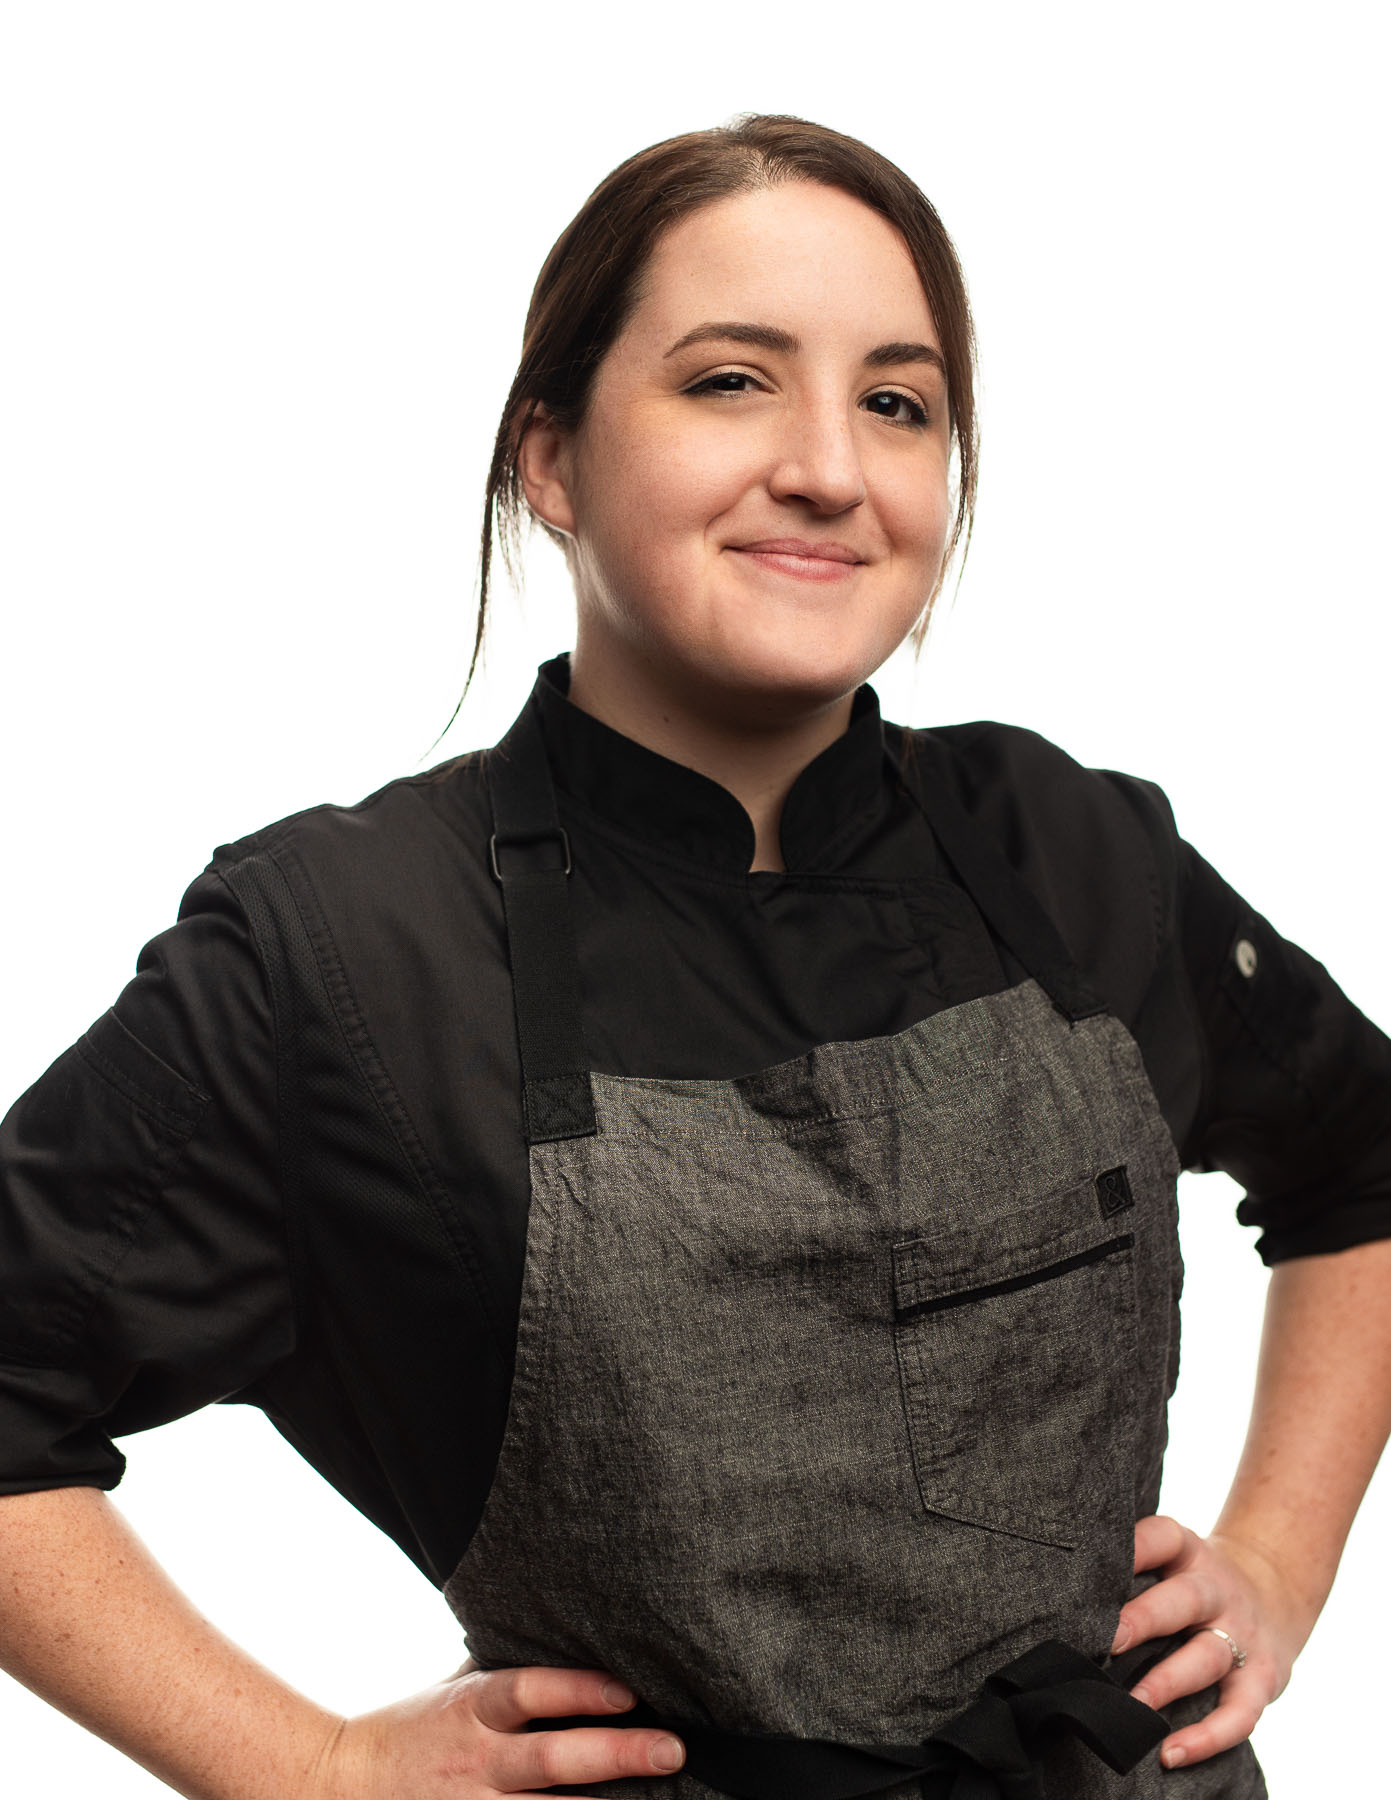 KES Headshot of woman with short brown hair wearing a gray chef outfit smiling and posing for the camera